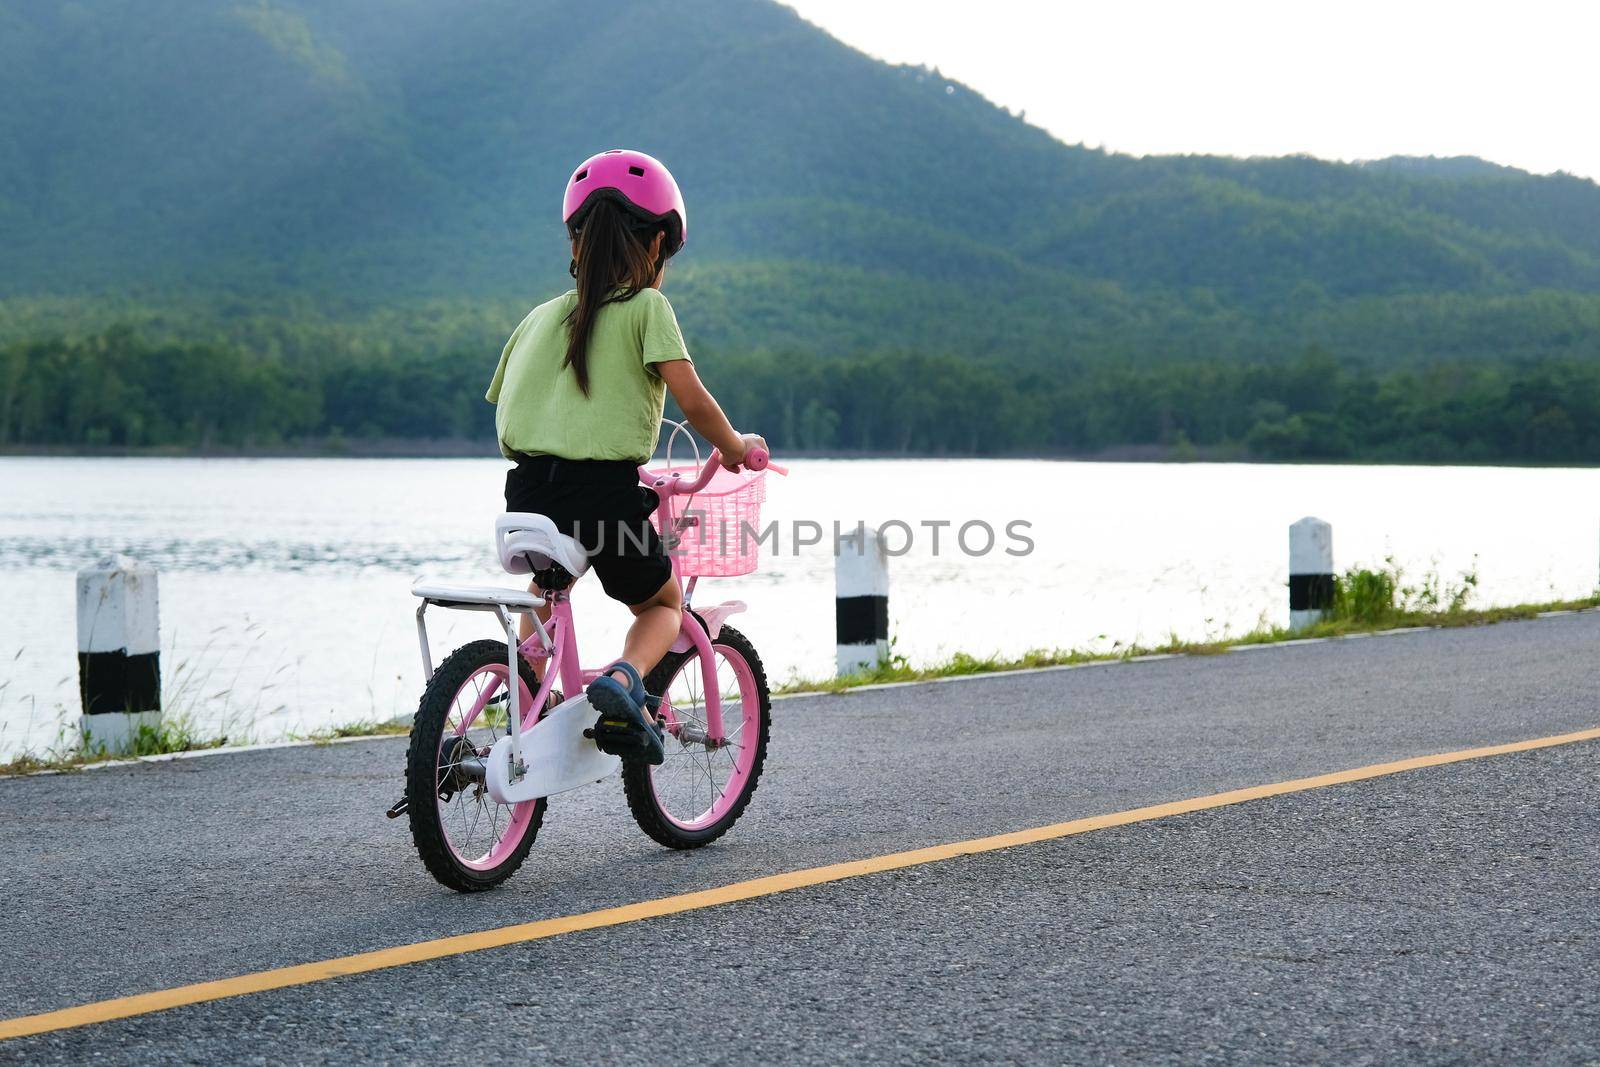 Cute little girl in a helmet riding a bicycle on an asphalt road in summer. Happy little girl riding a bicycle outdoors. Healthy Summer Activities for Kids by TEERASAK